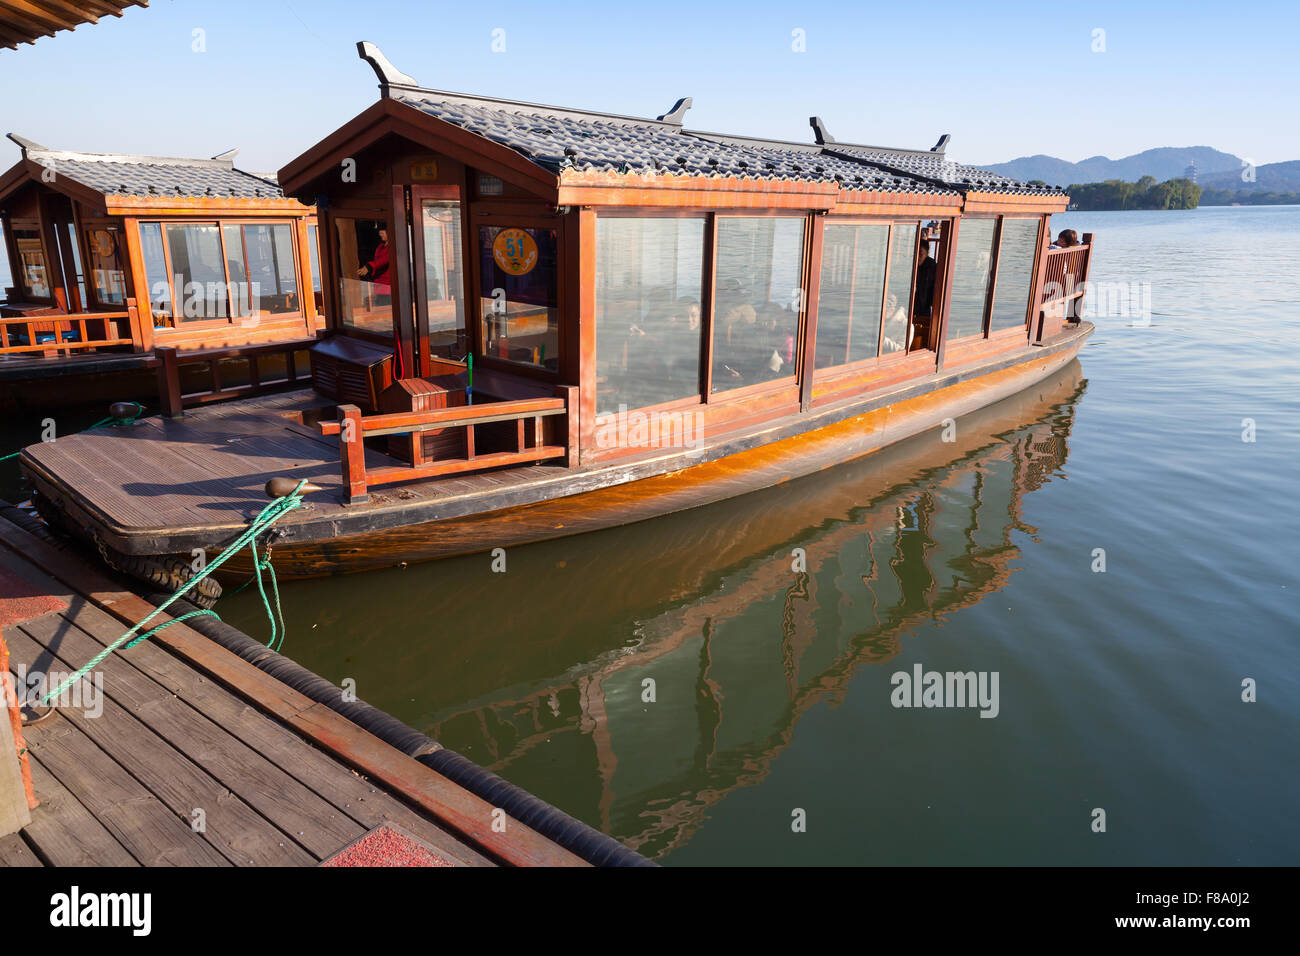 Hangzhou, China - December 5, 2014: Traditional Chinese wooden boat with passengers on the West Lake, famous park in Hangzhou Stock Photo